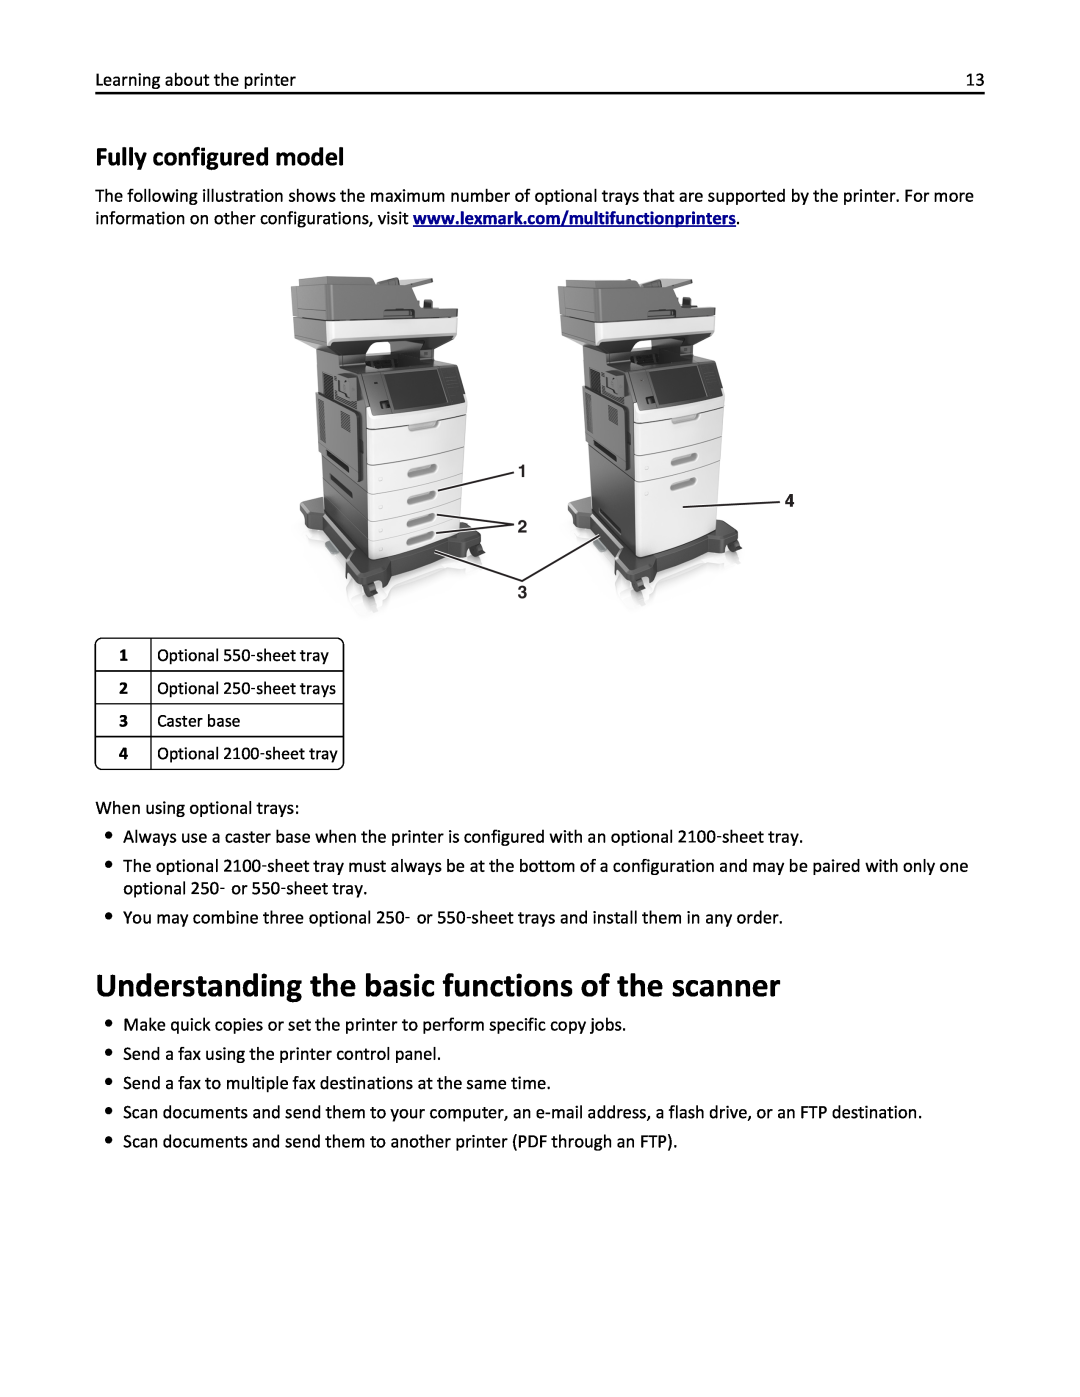 Lexmark 237, MX710DHE, 24T7310, 037 manual Understanding the basic functions of the scanner, Fully configured model 